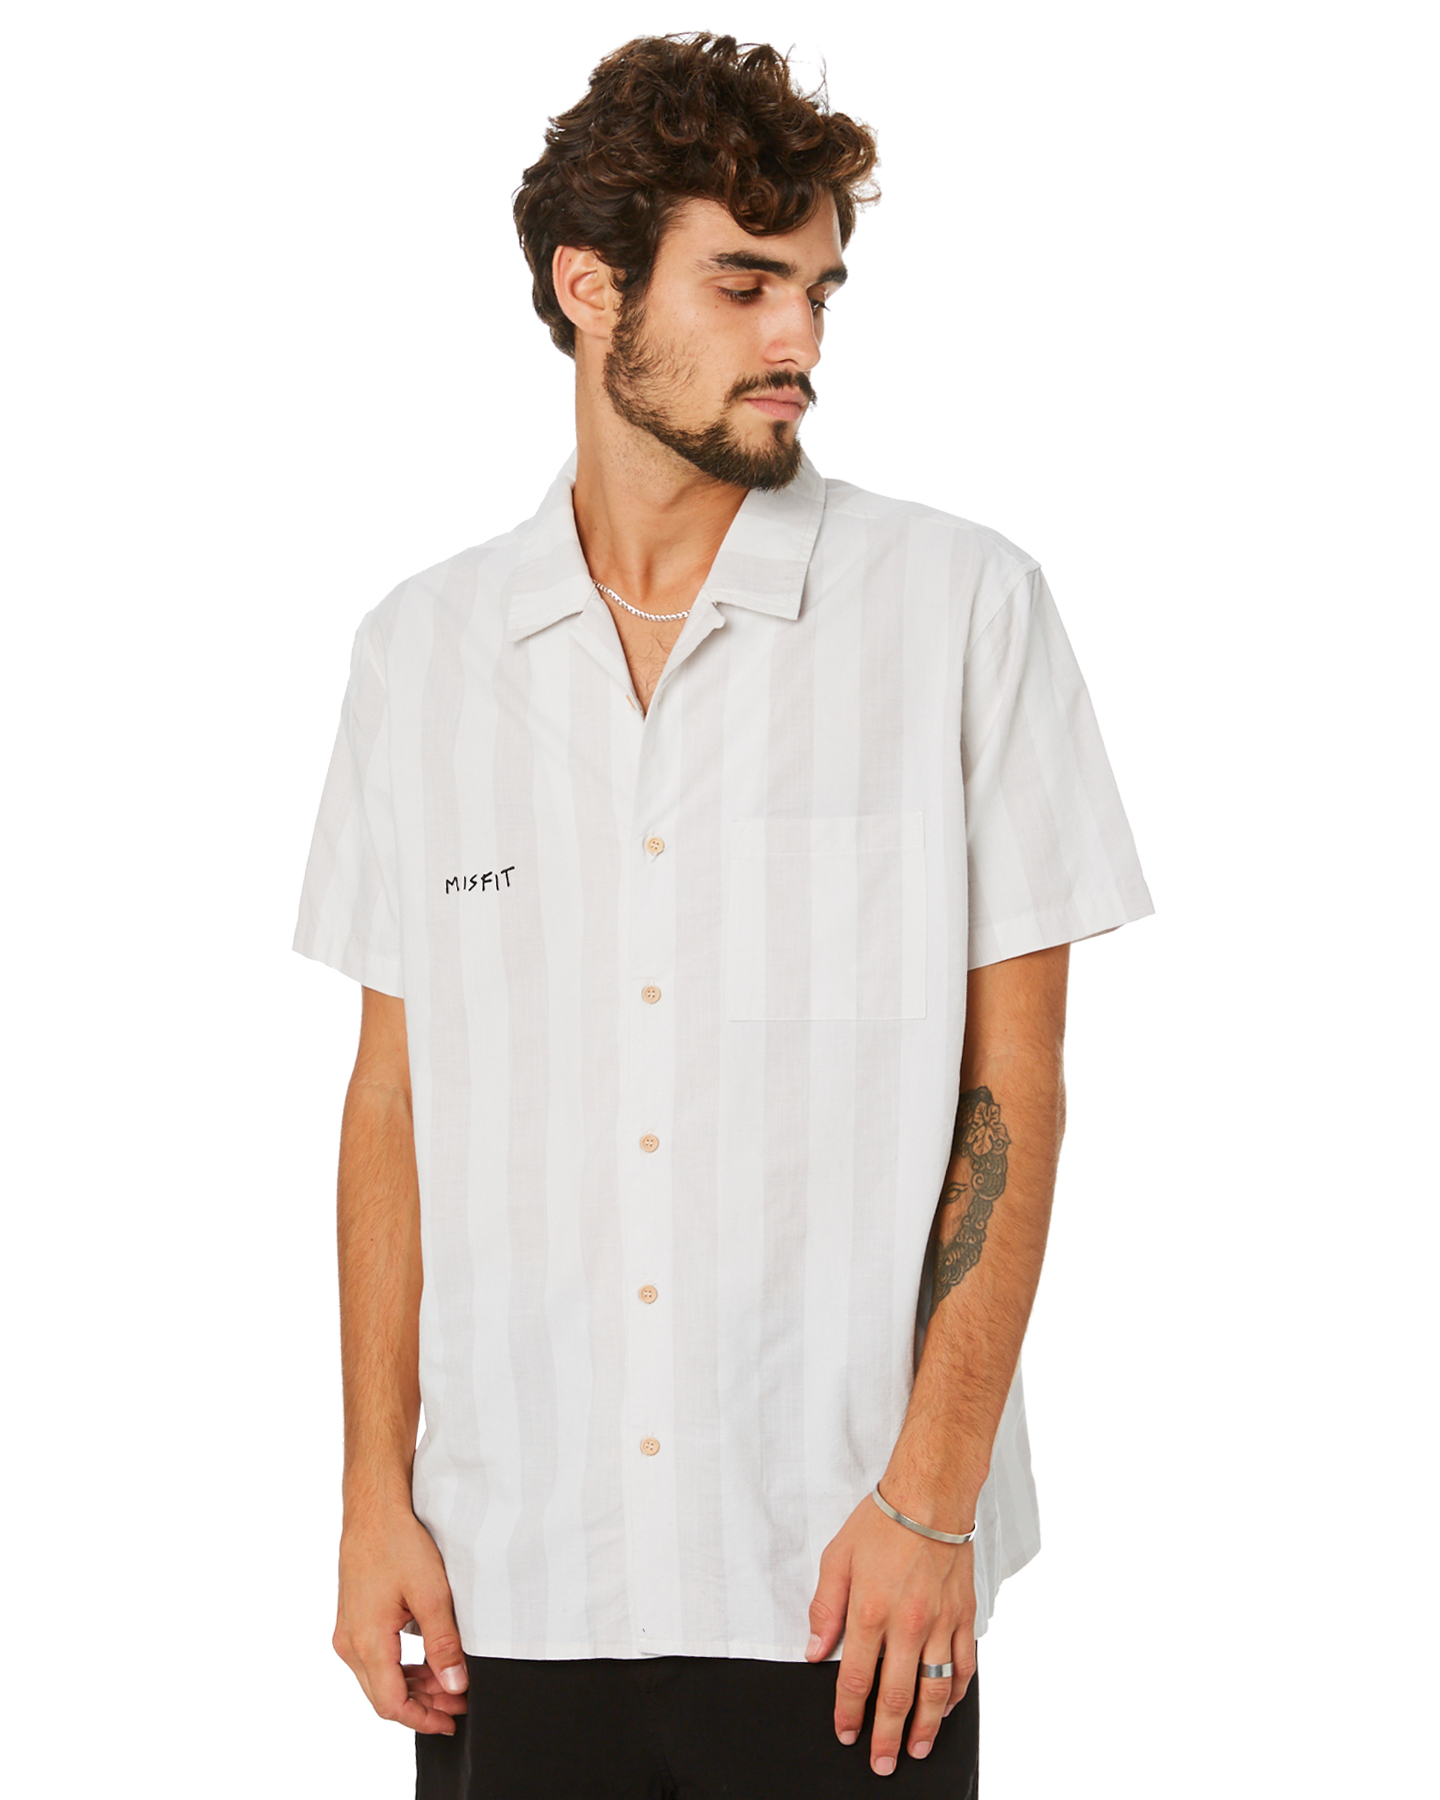 Misfit Lilly Mens Shirt - Off White | SurfStitch